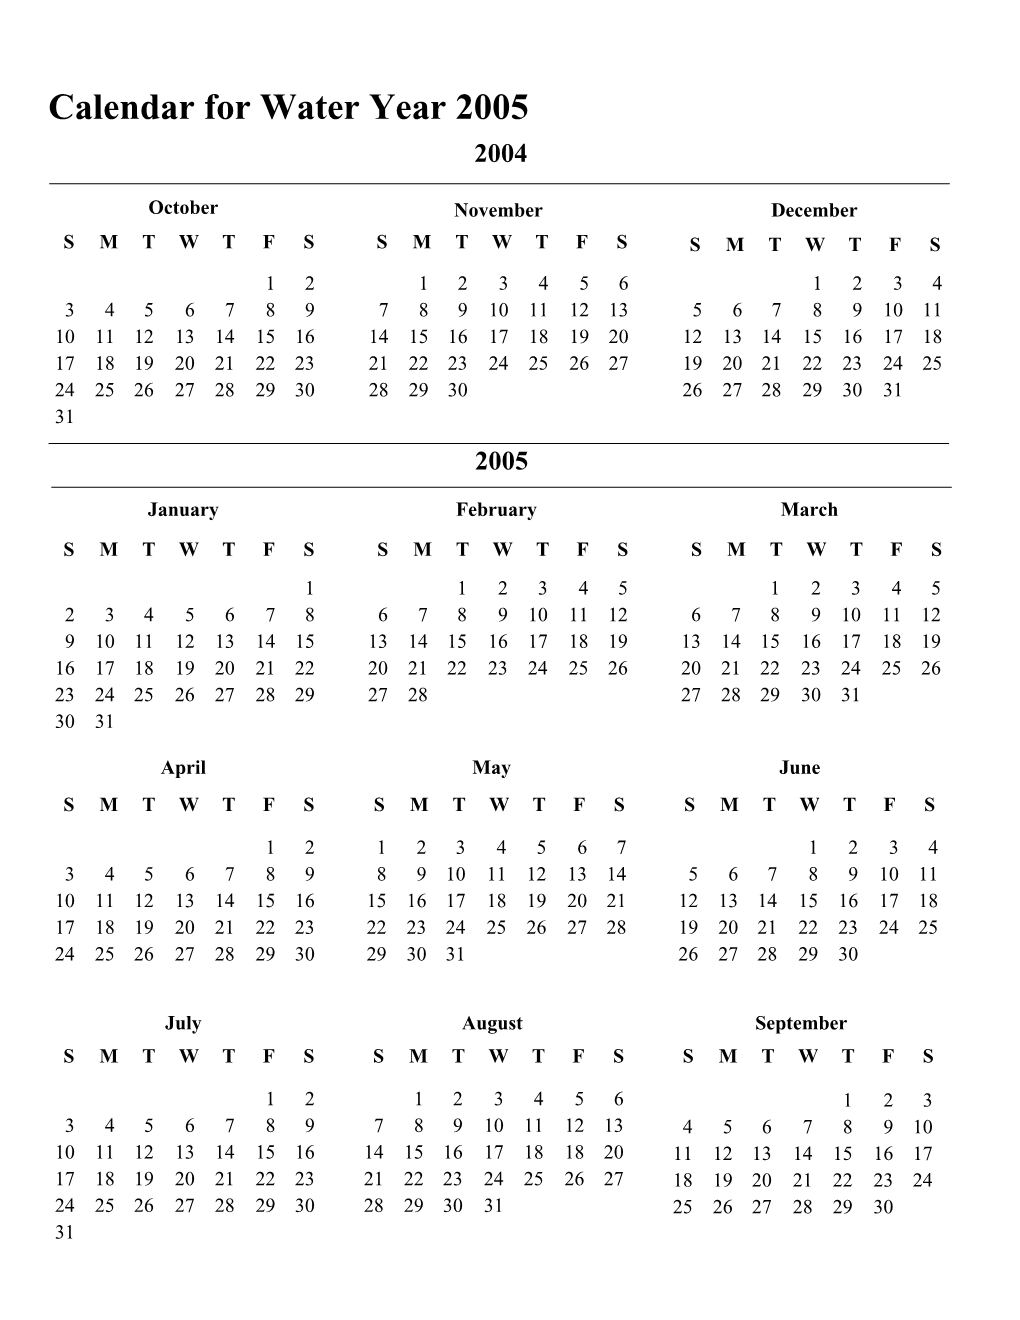 Calendar for Water Year 2005 2004